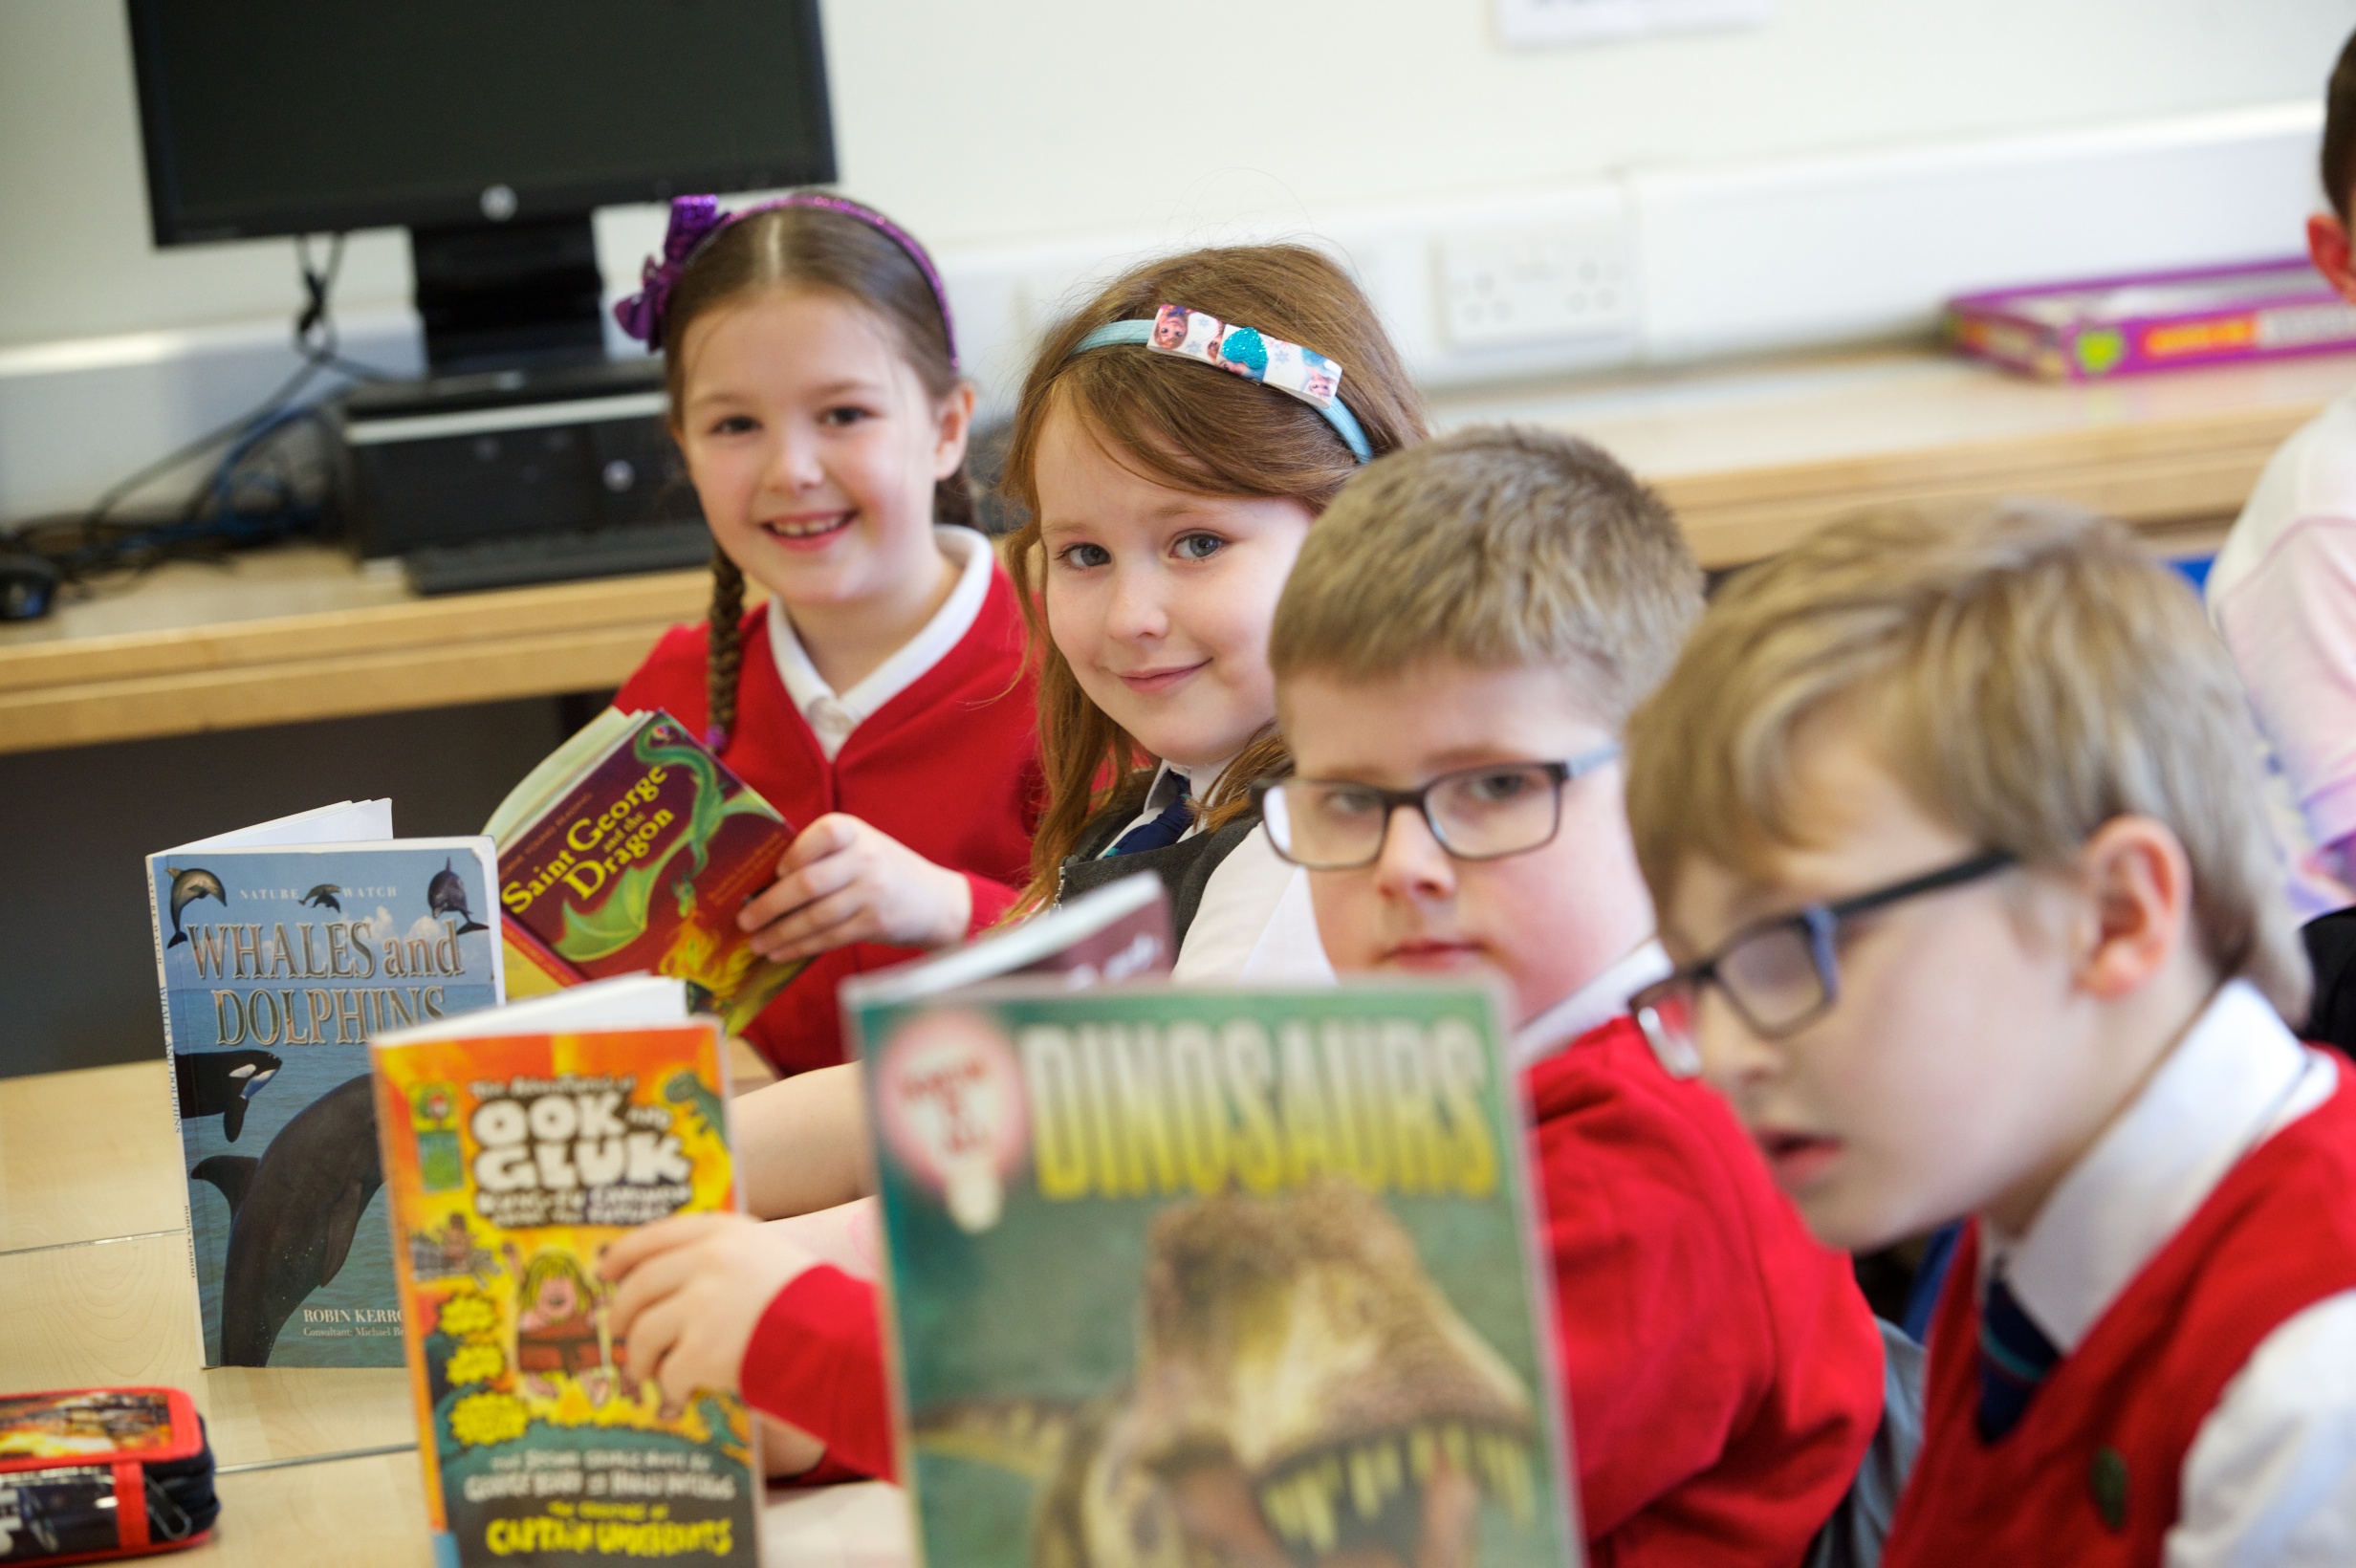 primary-school-celebrates-storytelling-and-reading-at-book-festival